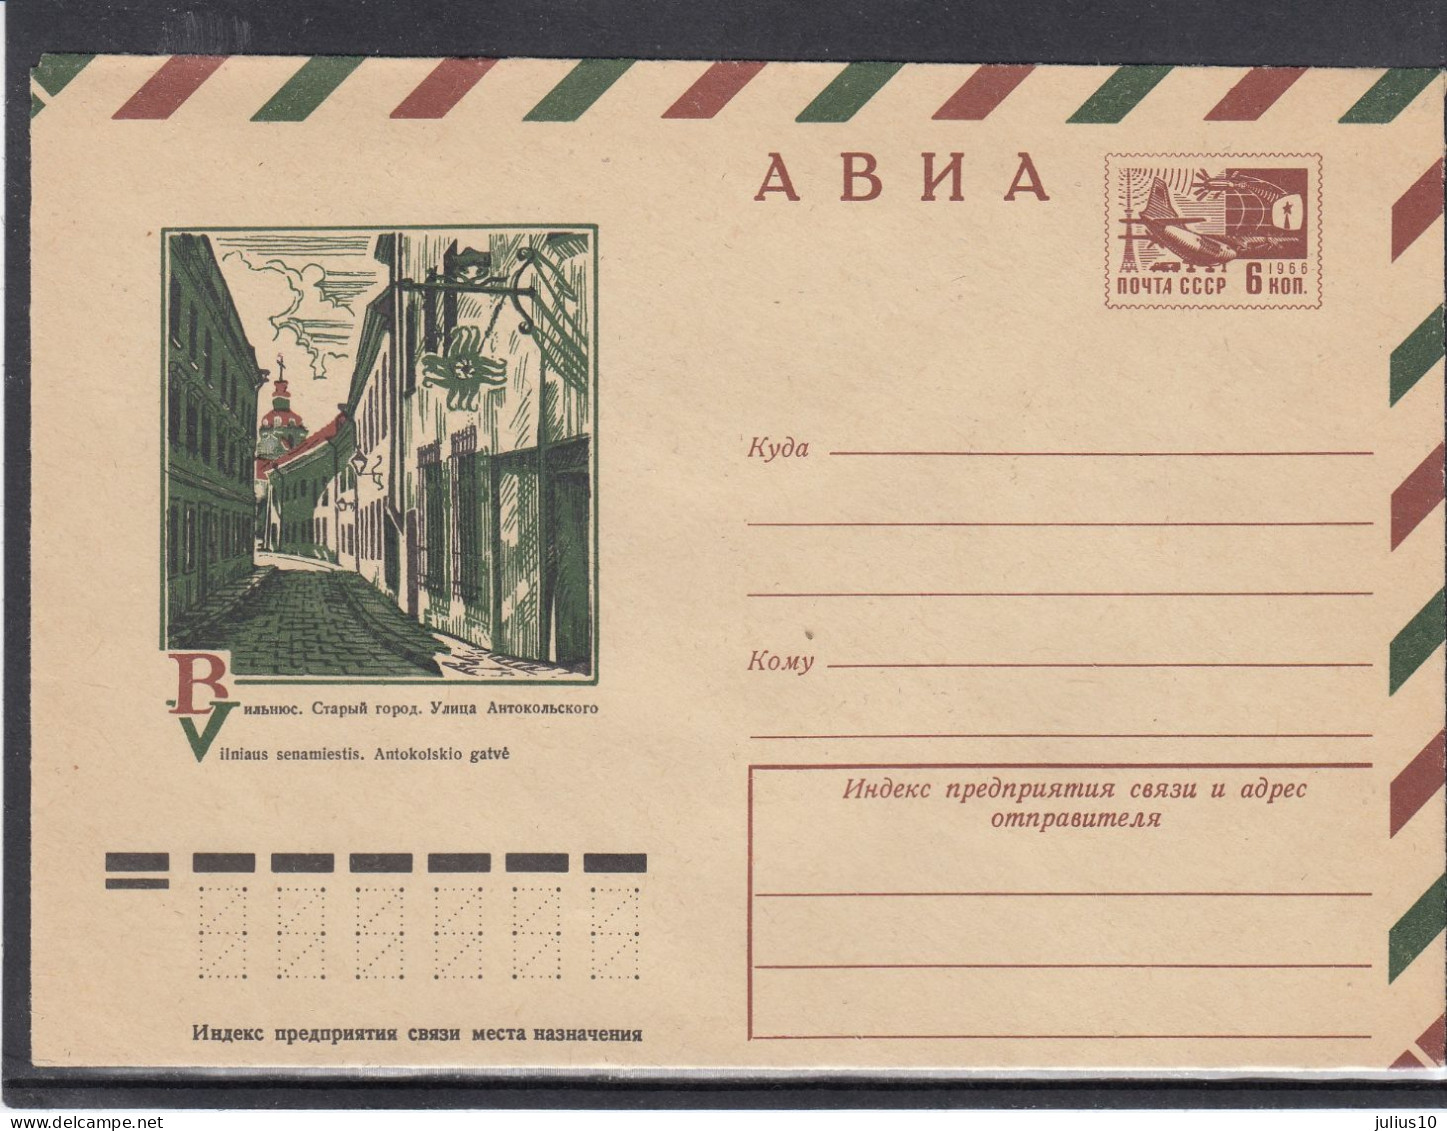 LITHUANIA (USSR) 1975 Cover Vilnius Old Town #LTV98 - Lituania